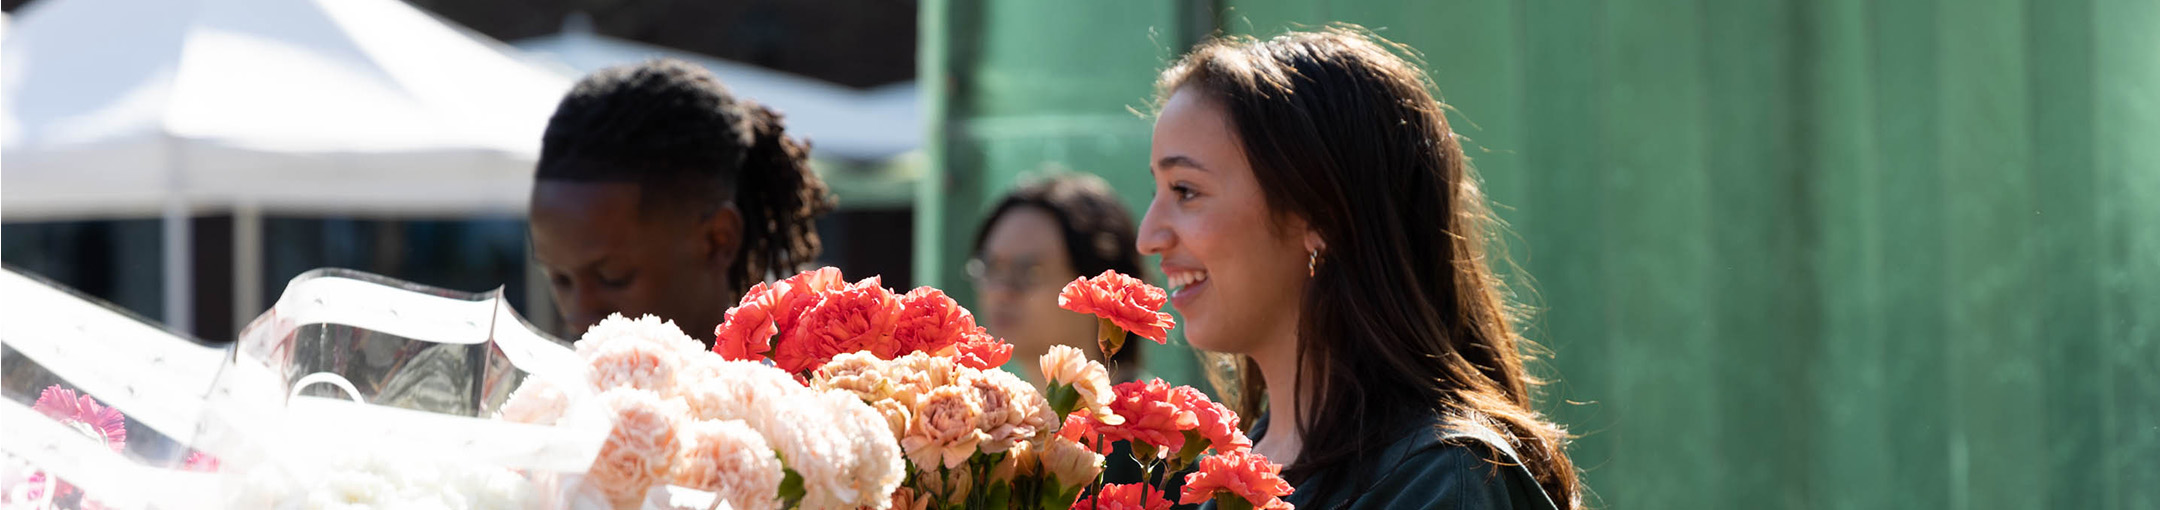 A student smiles while looking onto buckets of carnations at the CAB Tea Party event